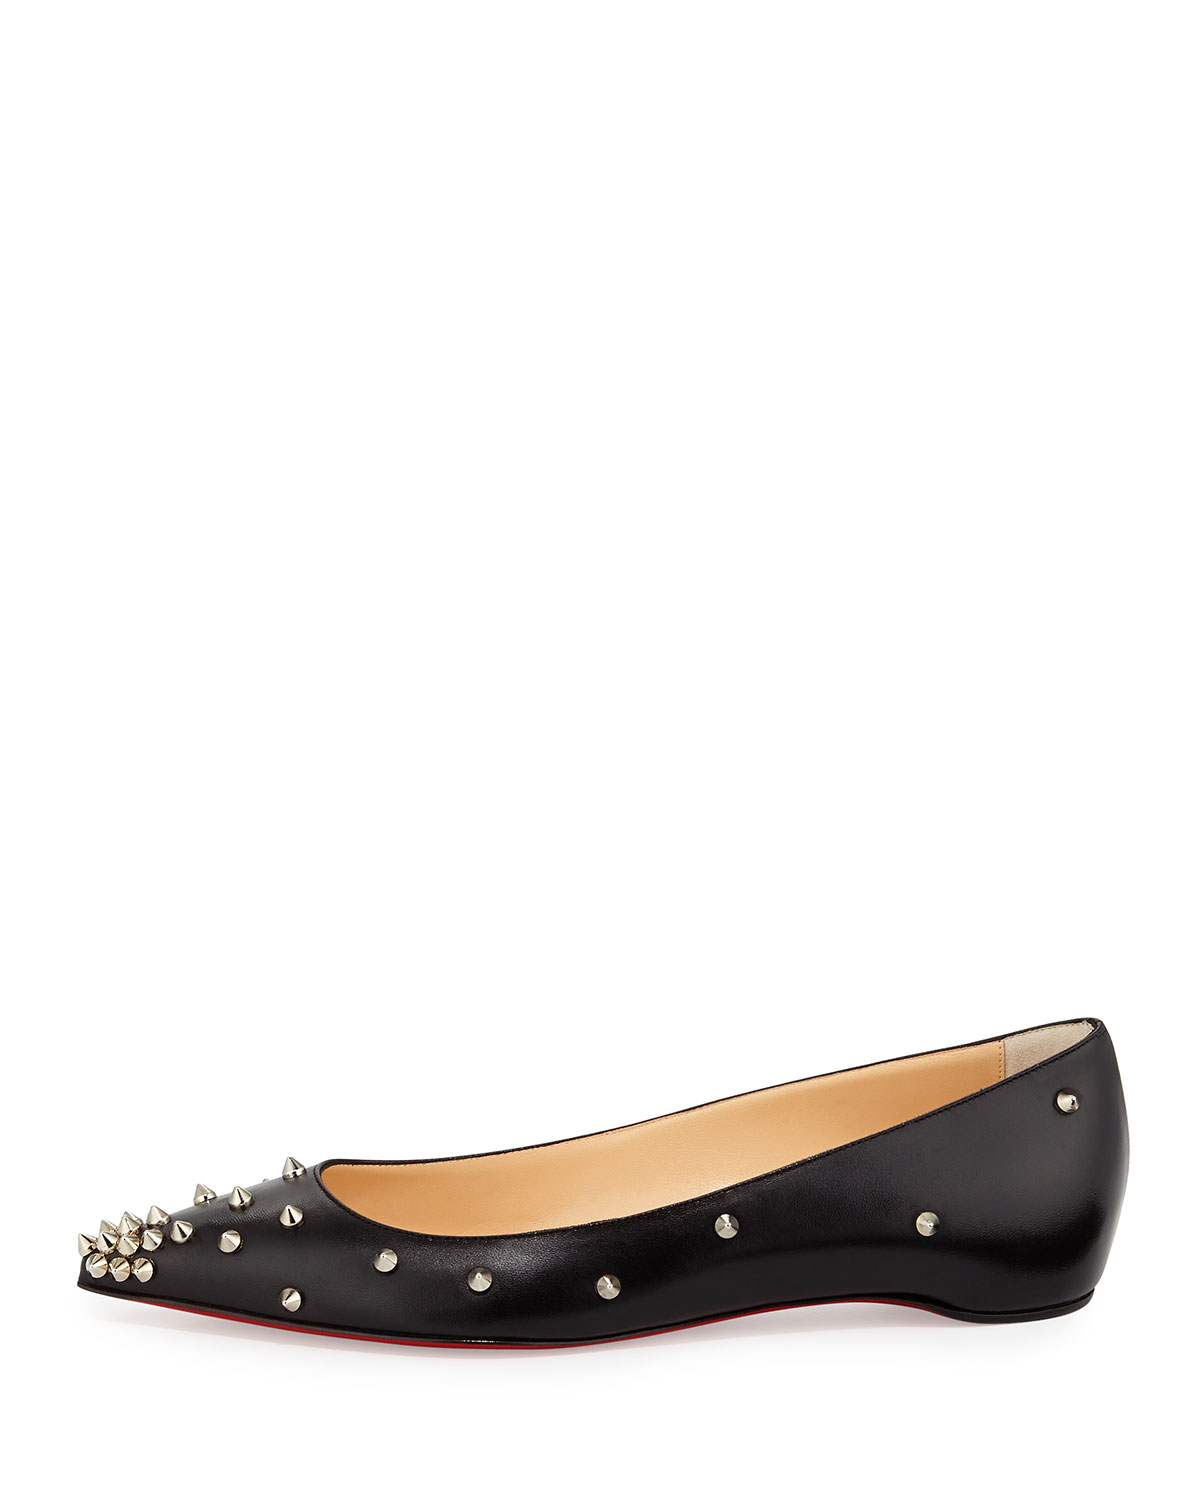 christian louboutin men shoes - christian louboutin pointed-toe flats Black suede | The Little ...